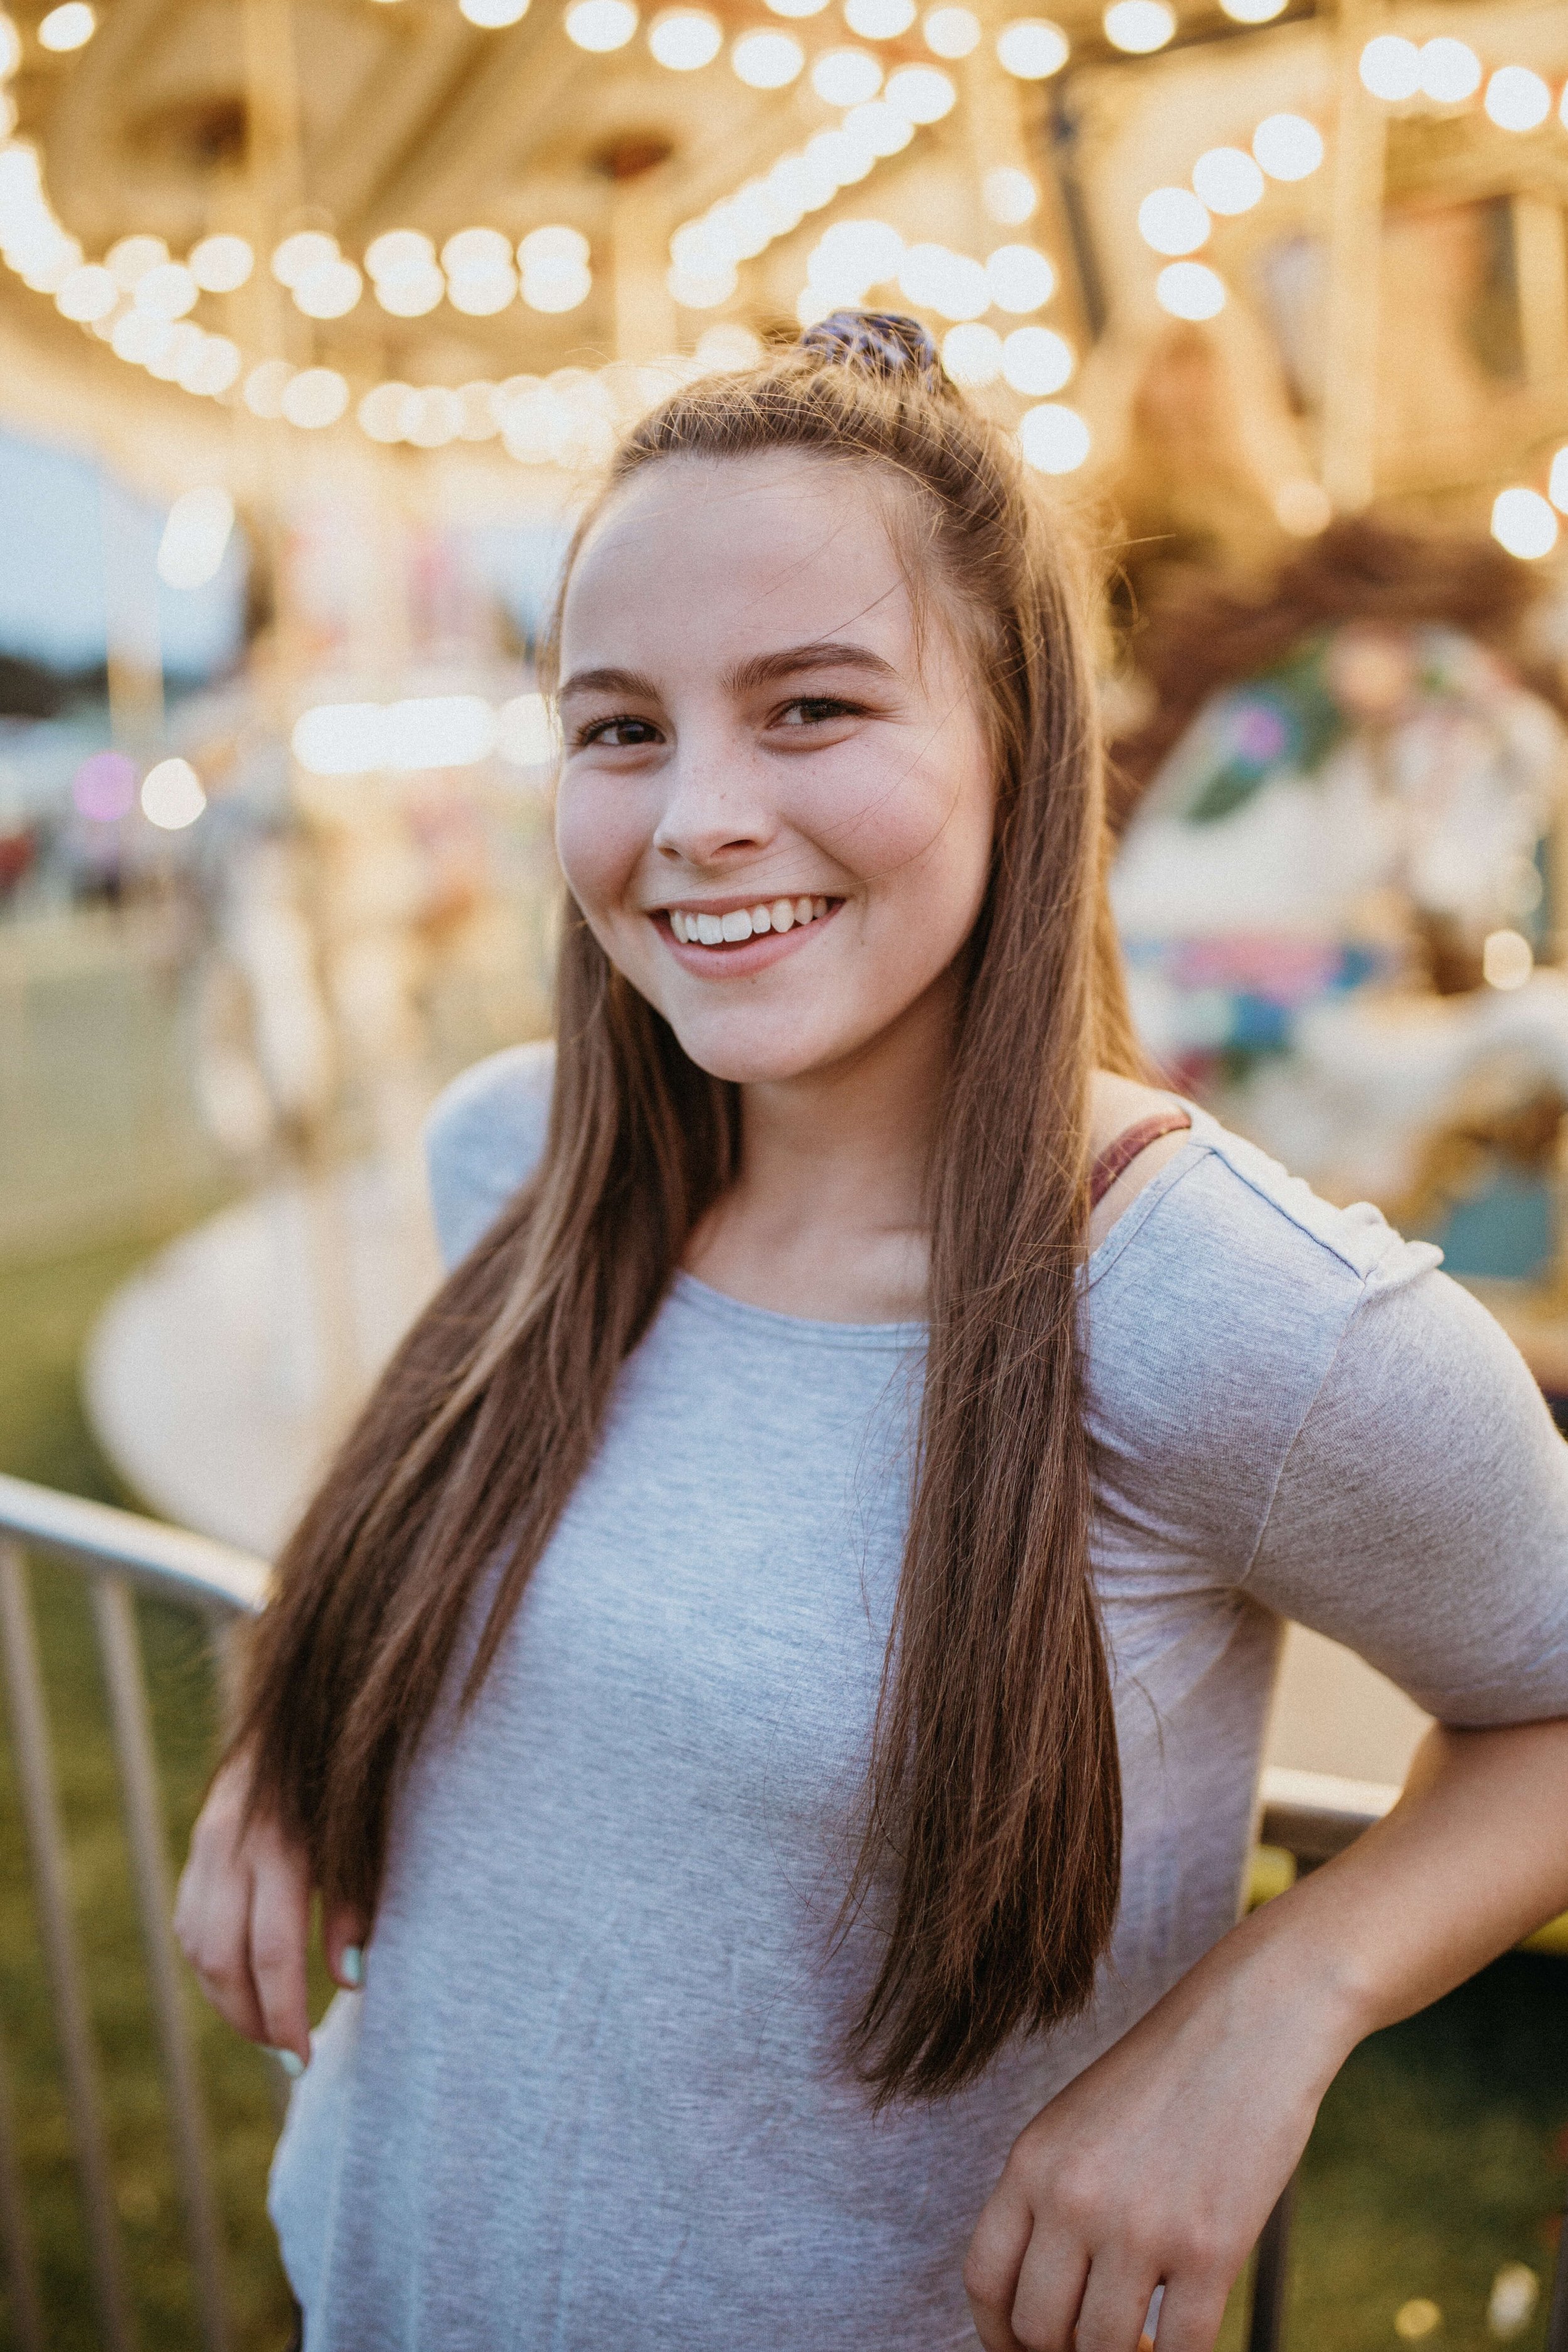 Carousel Senior Picture | Benton-Franklin County Fair &amp; Rodeo | 400 Lux Photography